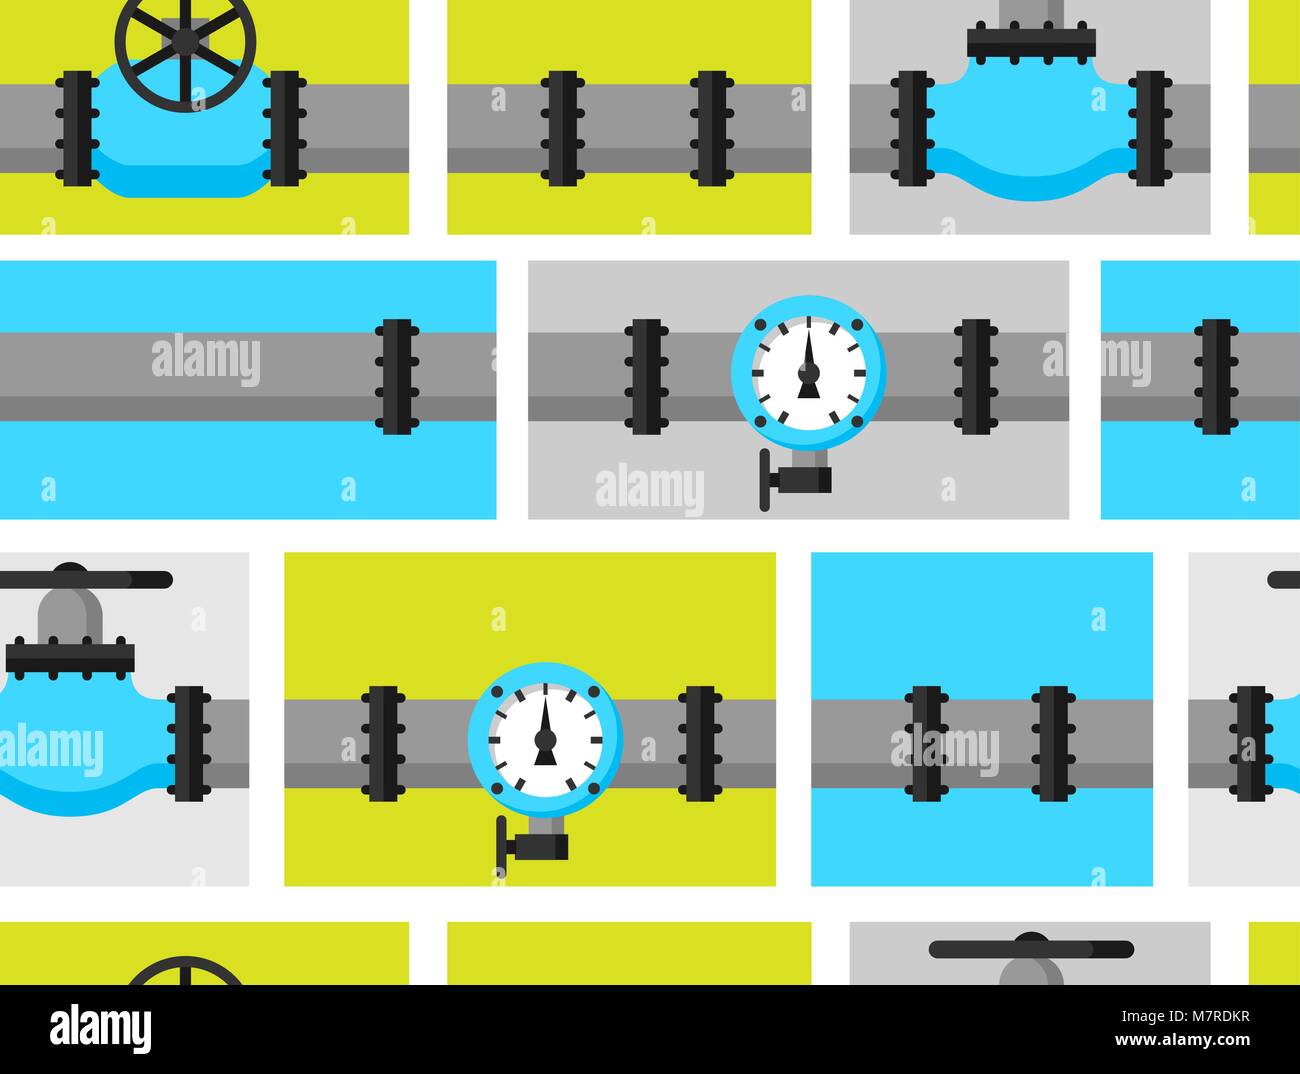 Gas control valve and pipes transportation. Industrial seamless pattern Stock Vector